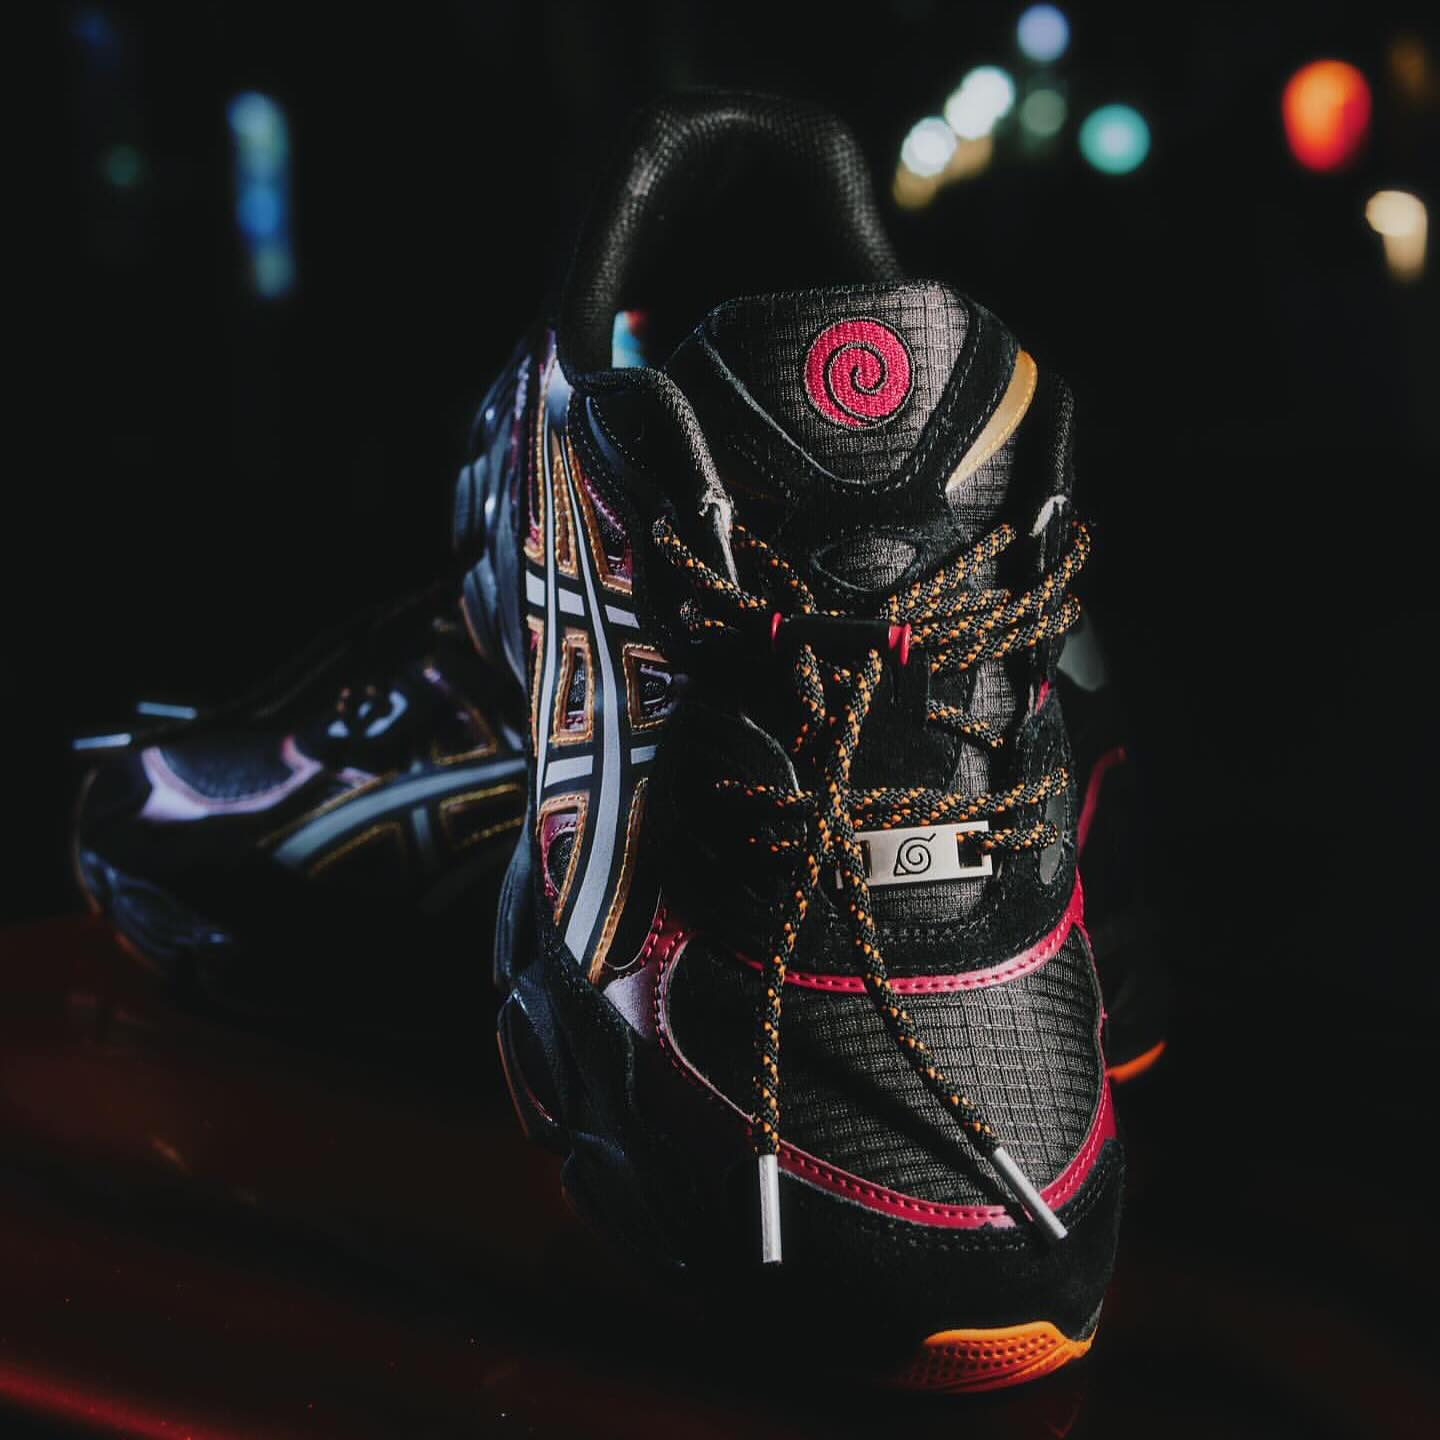 Photos of the Naruto x ASICS GEL-NYC "Final Arc" sneaker collab